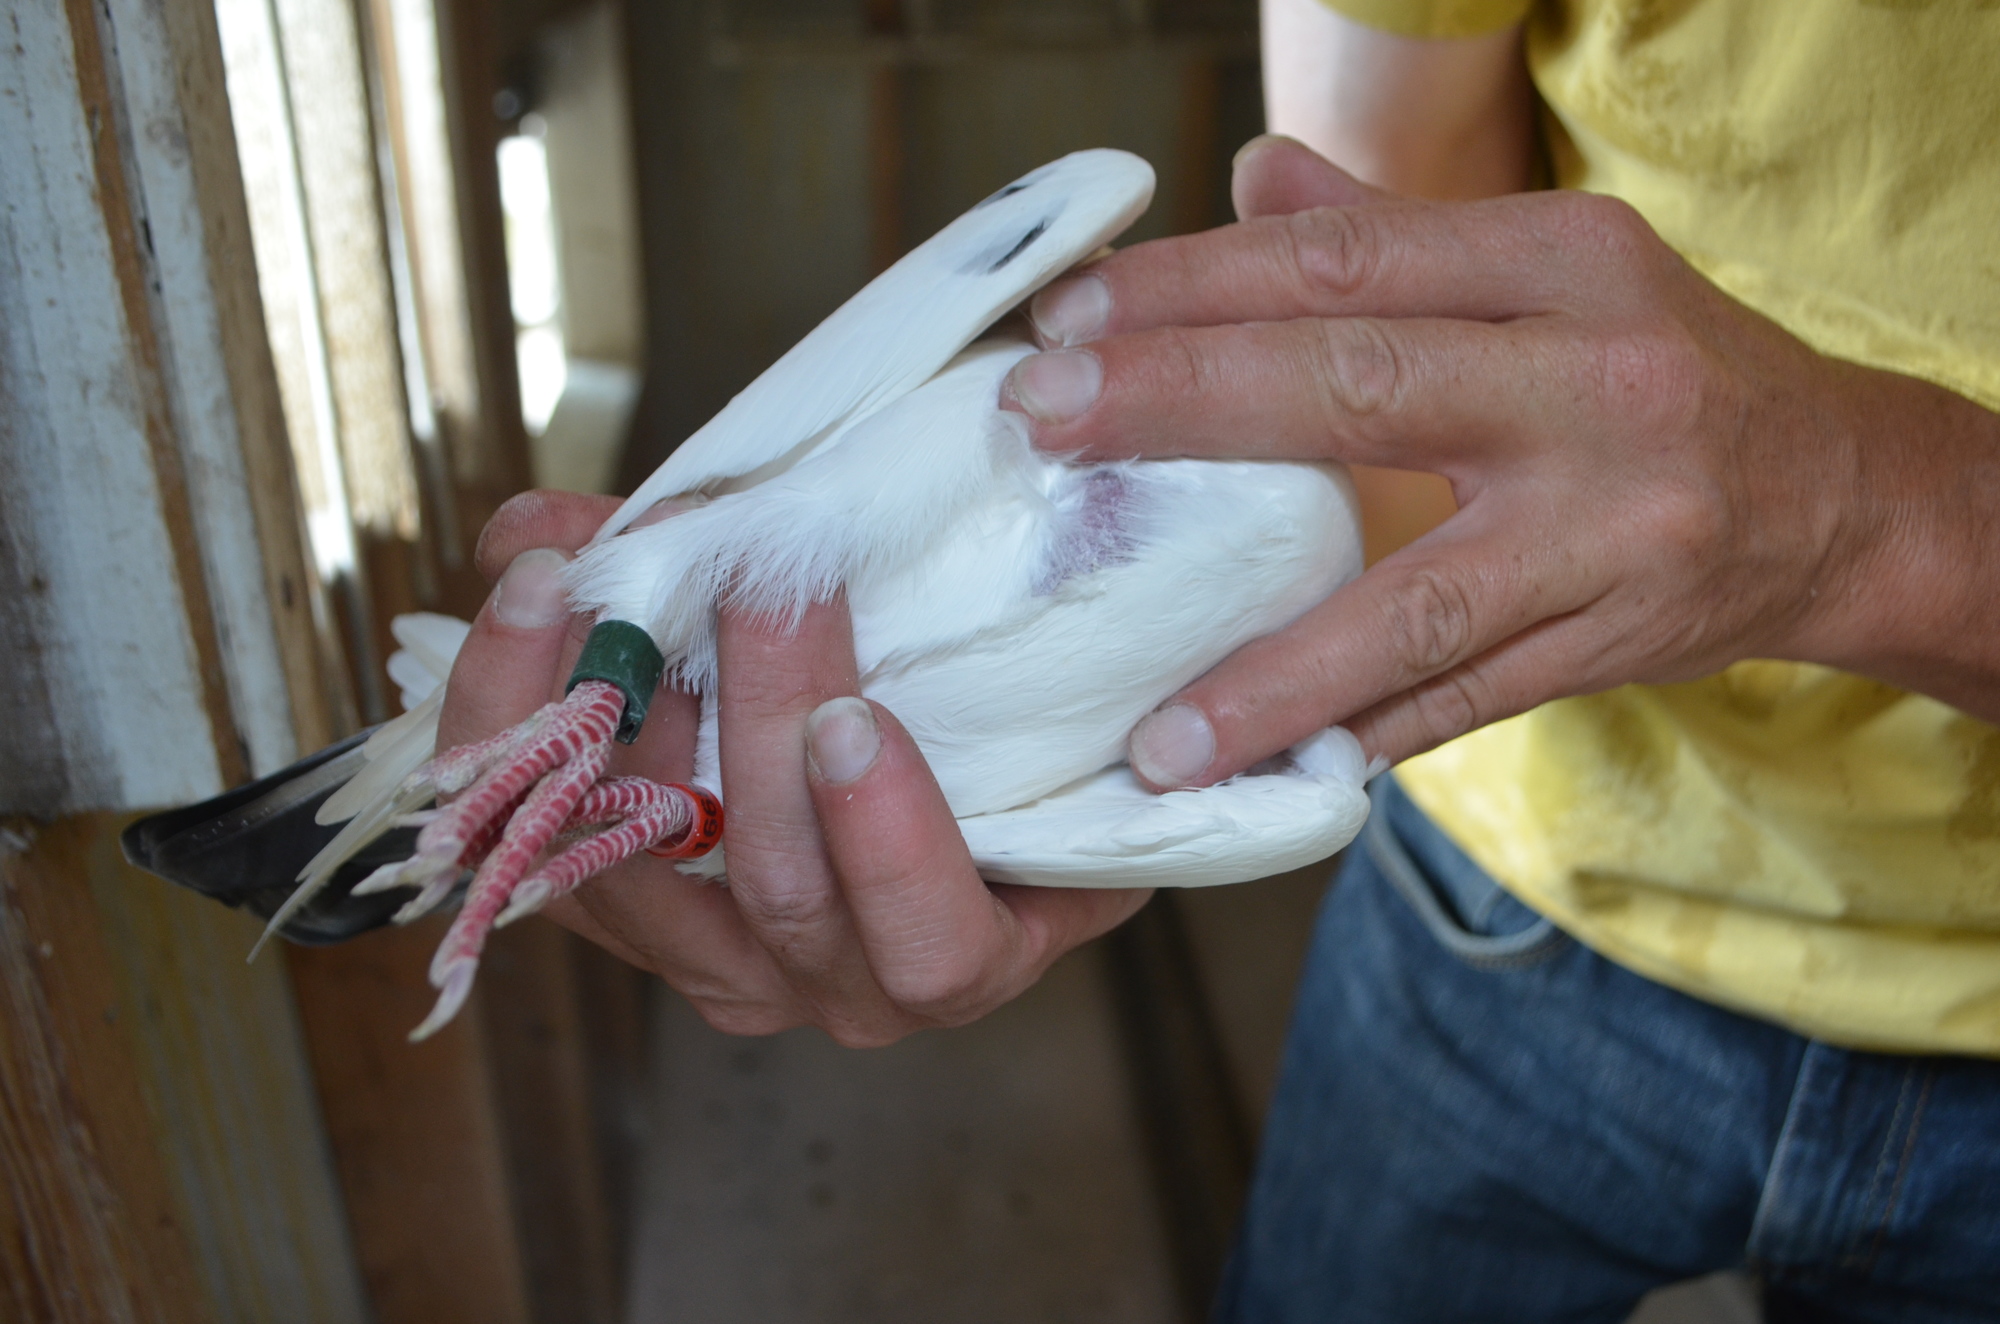 Myakka City's Charles Cole, 39, holds one of his racing pigeons at home in the pigeon loft. The green device on the foot of the pigeon tracks its average speed during races.